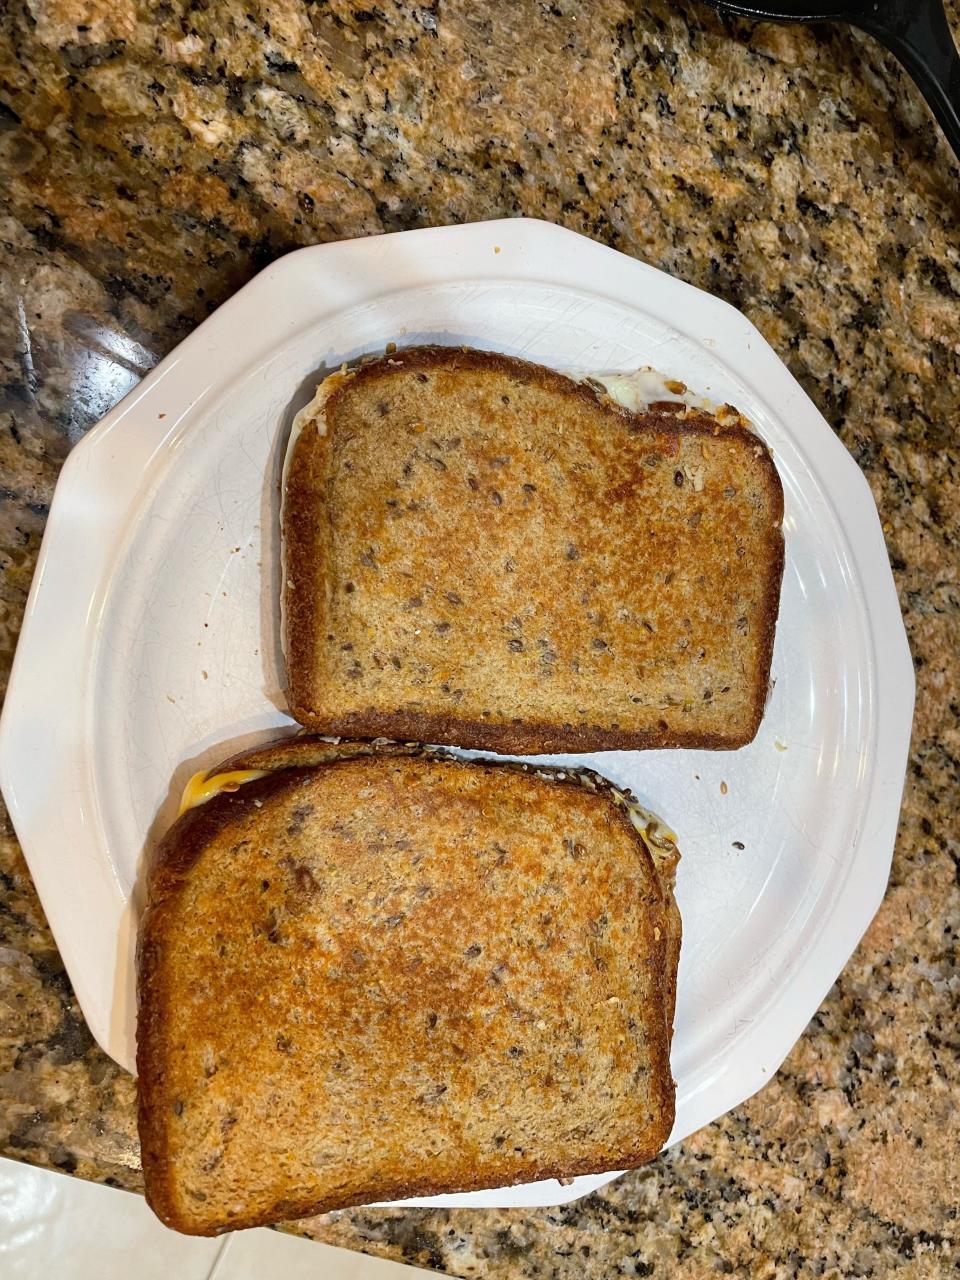 A 54-year-old Fayetteville pharmacist eats cheese sandwiches at home.